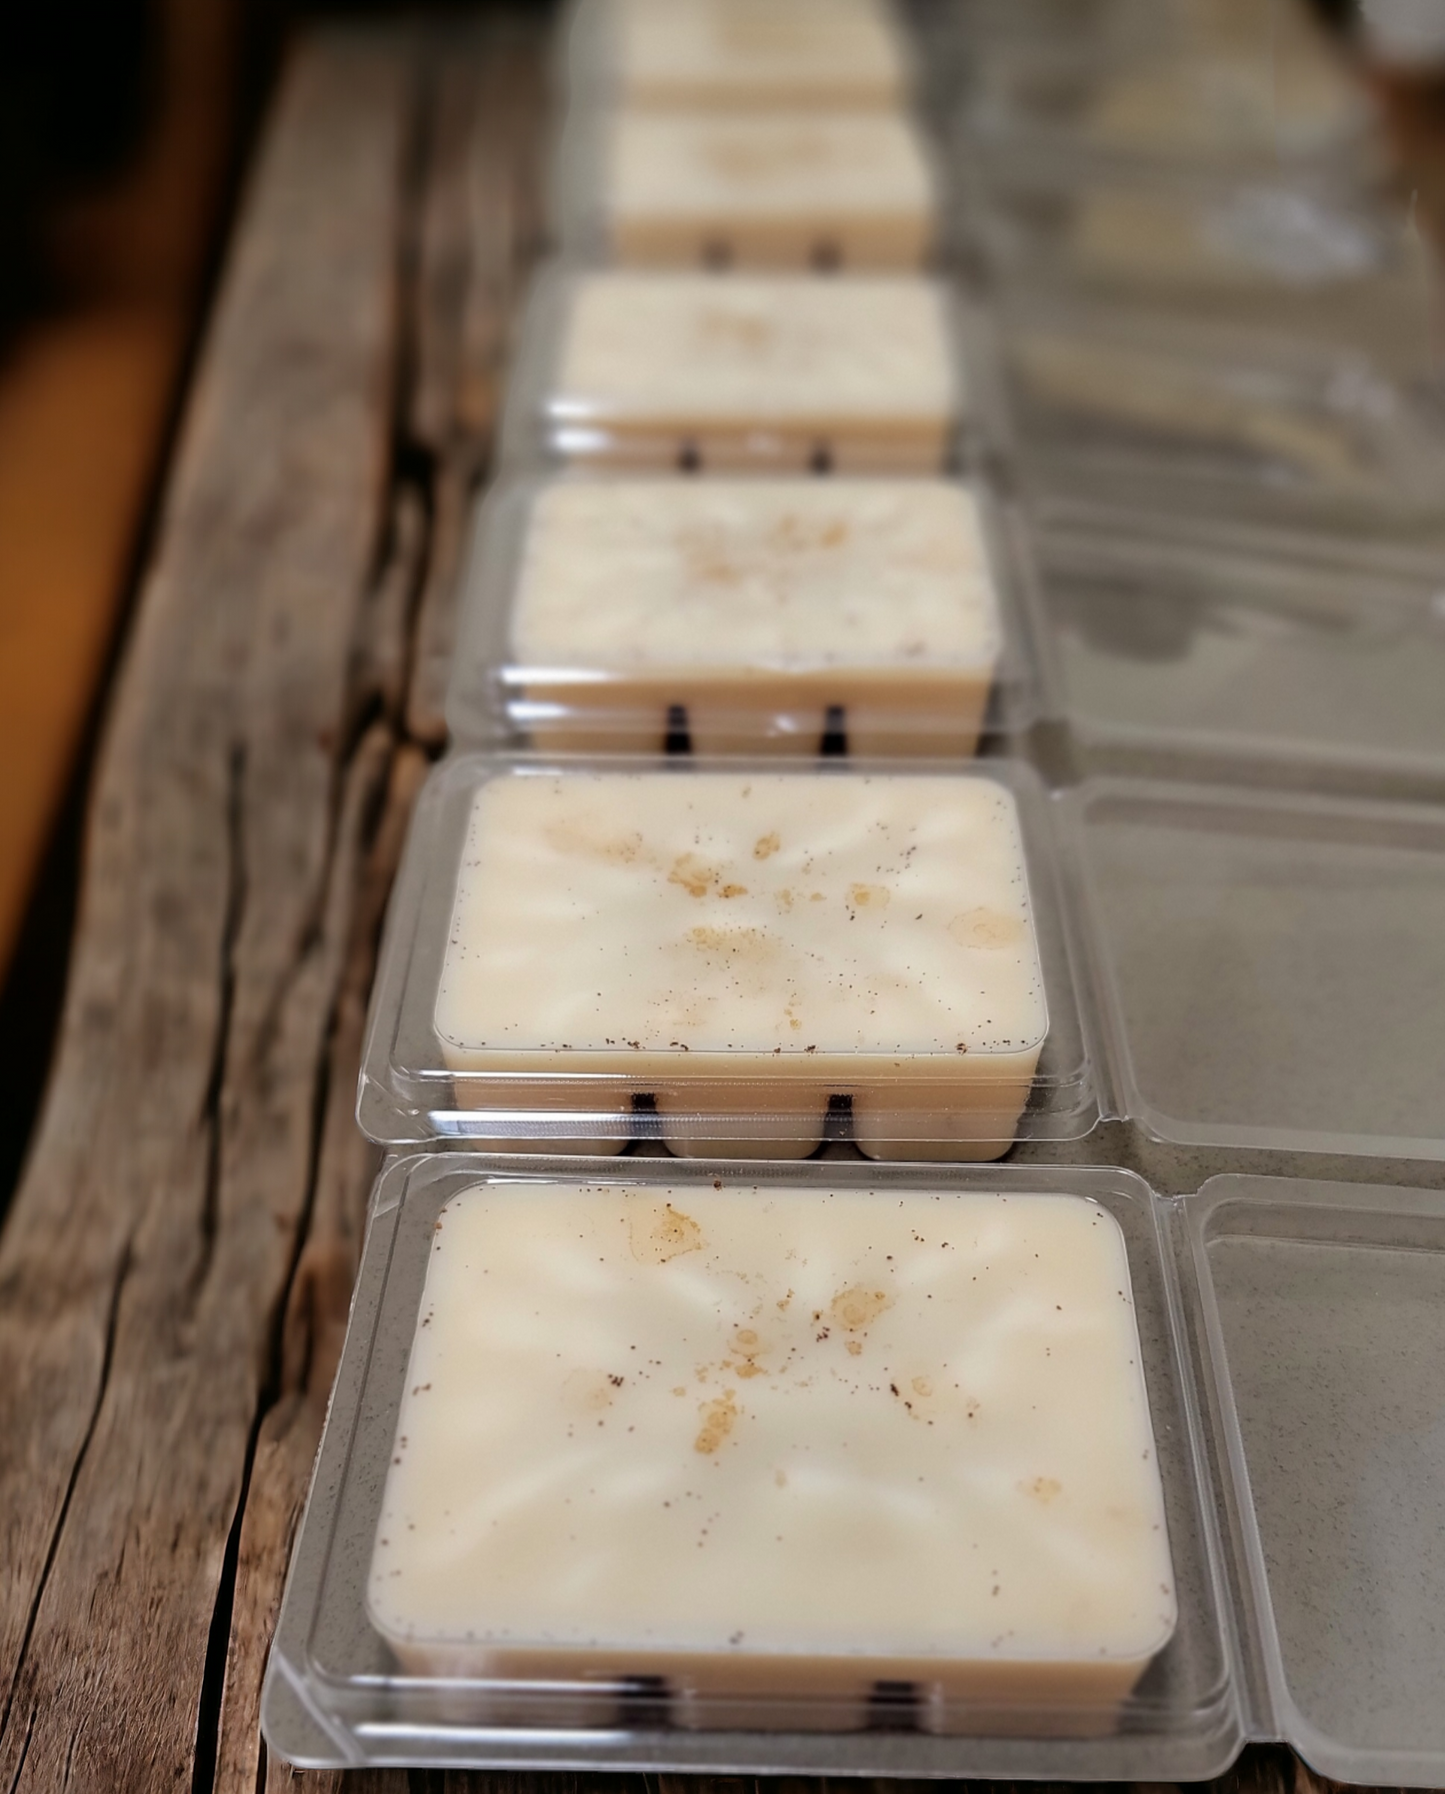 The Daily Grind Wax Melts